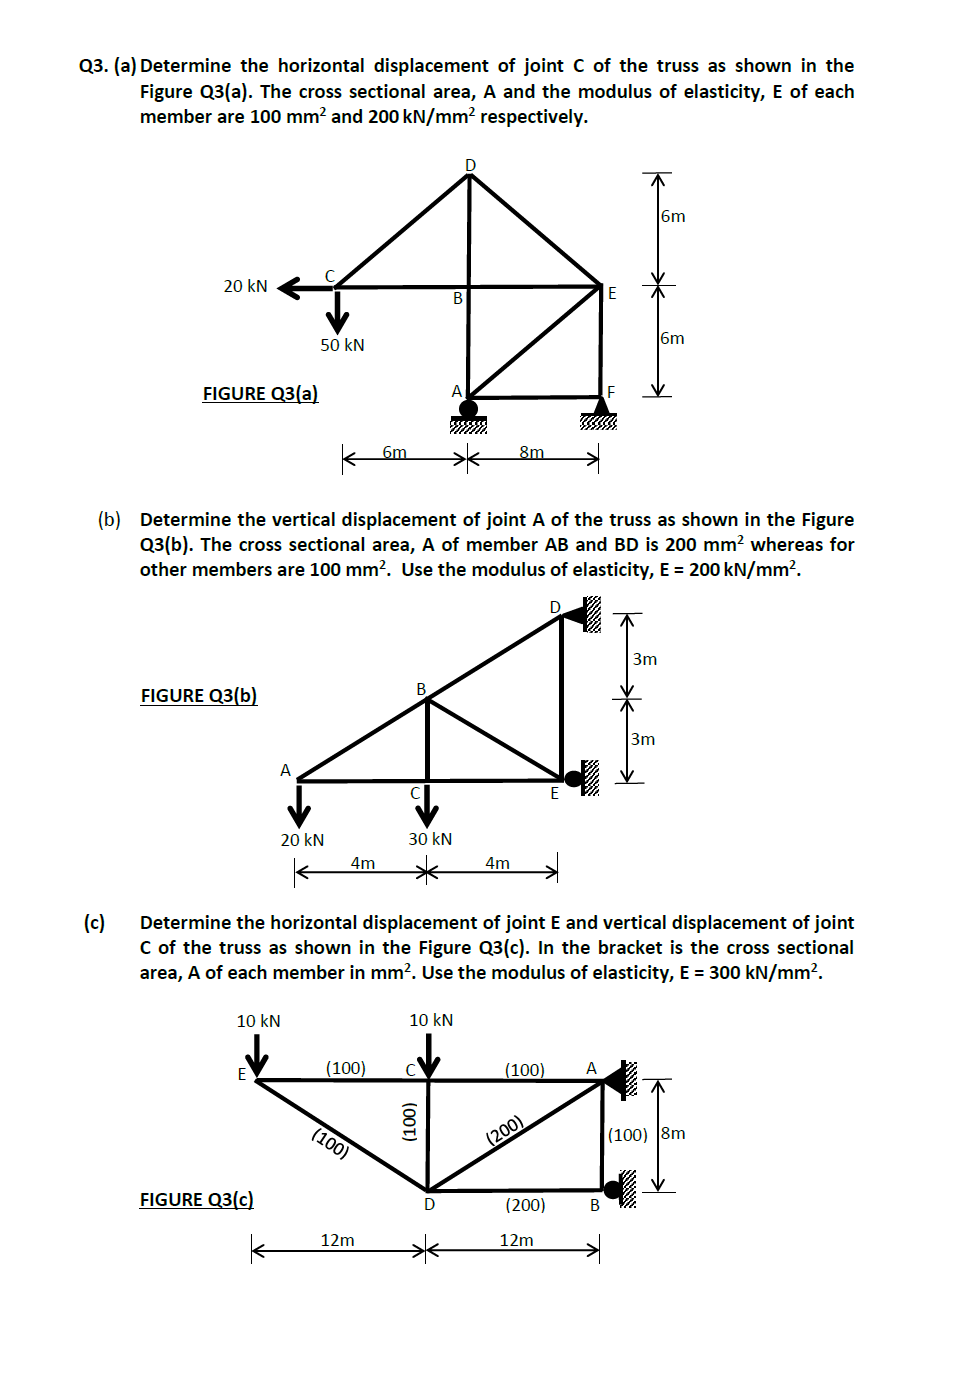 Q3. (a) Determine the horizontal displacement of joint C of the truss as shown in the
Figure Q3(a). The cross sectional area, A and the modulus of elasticity, E of each
member are 100 mm² and 200 kN/mm² respectively.
20 kN
(c)
FIGURE Q3(a)
FIGURE Q3(b)
A
50 kN
FIGURE Q3(c)
20 kN
10 kN
K
(b) Determine the vertical displacement of joint A of the truss as shown in the Figure
Q3(b). The cross sectional area, A of member AB and BD is 200 mm² whereas for
other members are 100 mm². Use the modulus of elasticity, E = 200 kN/mm².
D
4m
(100)
6m
(100)
12m
B
B
sssssss
30 kN
Determine the horizontal displacement of joint E and vertical displacement of joint
C of the truss as shown in the Figure Q3(c). In the bracket is the cross sectional
area, A of each member in mm². Use the modulus of elasticity, E = 300 kN/mm².
D
10 kN
8m
4m
(100)
(200)
(200)
12m
A
3m
B
6m
3m
(100) 8m